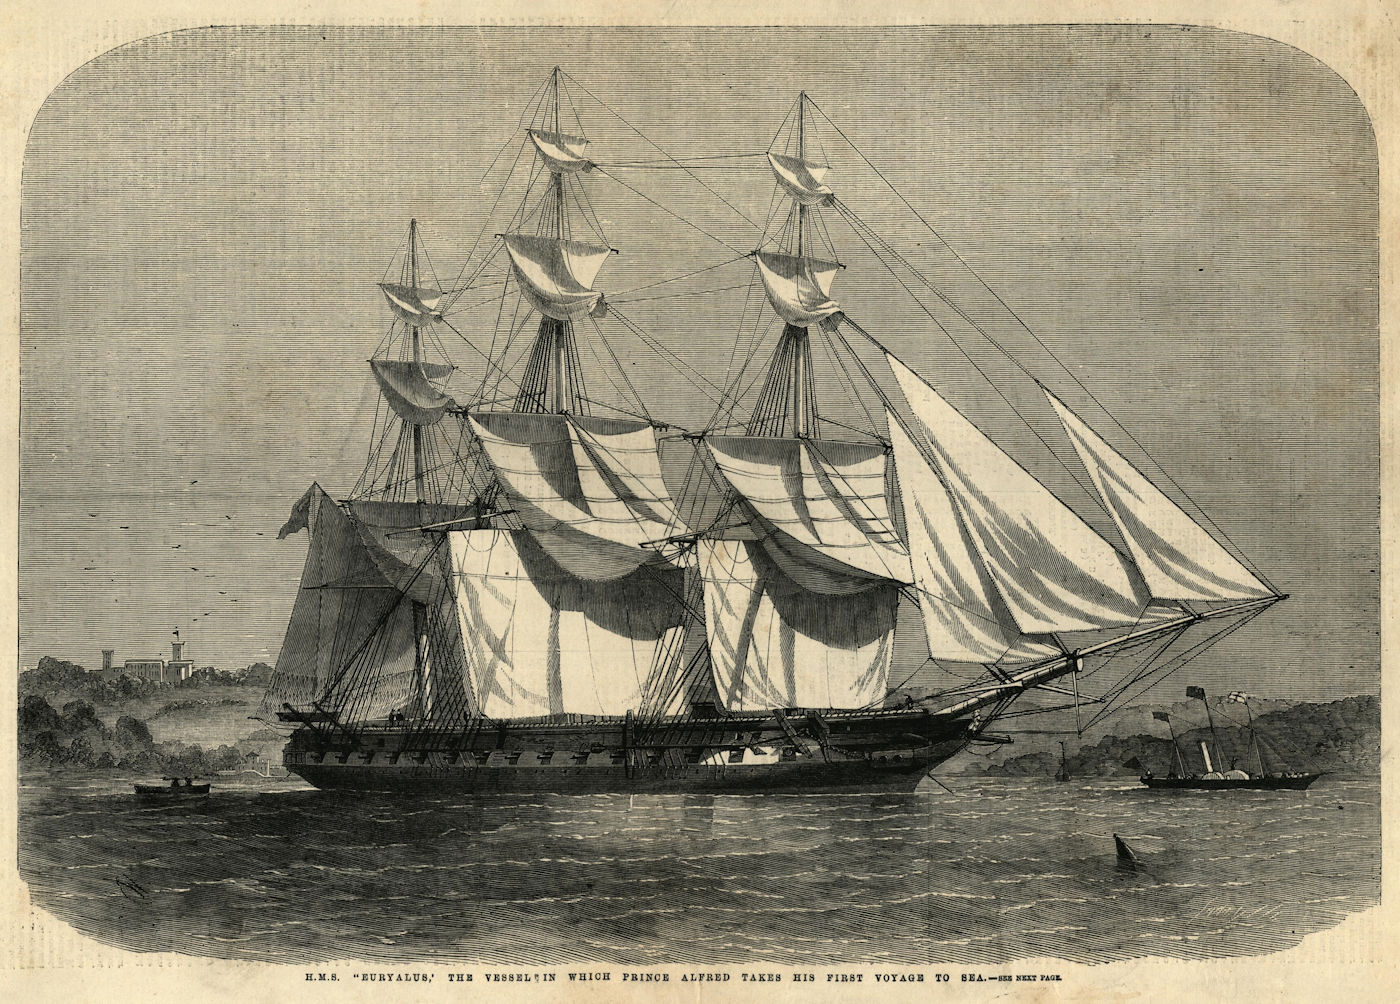 HMS Euryalus, the ship in which Prince Alfred took his first voyage to sea 1858